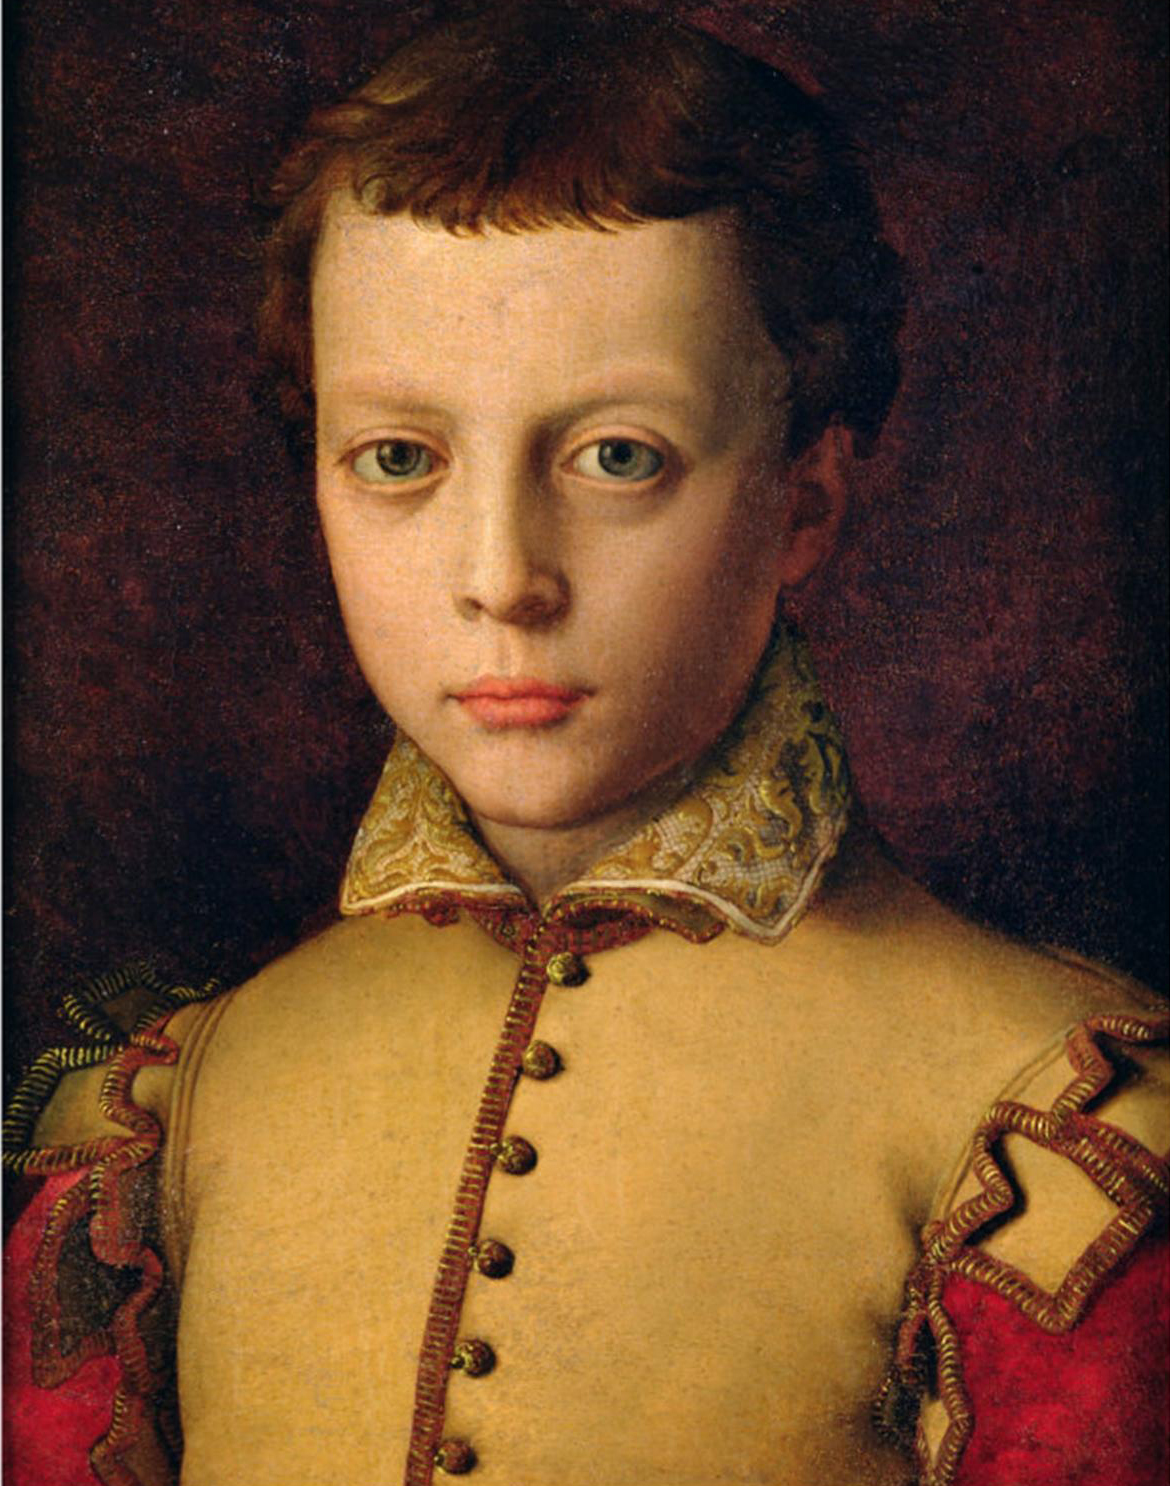 The Medici family was a political dynasty that lasted for over 200 years, producing nine leaders of the Republic of Florence, four popes of the Catholic Church, and numerous dukes of Florence and Tuscany. This portrait of Ferdinando de’Medici as a youth was painted by Agnolo Bronzino in about 1560. Court painter to the Medicis for much of his career, Bronzino is known for the care he took in portraying his wealthy patrons’ costumes. In this painting, Ferdinando’s garment looks almost three-dimensional—as if you could feel the texture of the satin and velvet. Later in life, Ferdinando became the Grand Duke of Tuscany. (Image via Wikimedia Commons) 